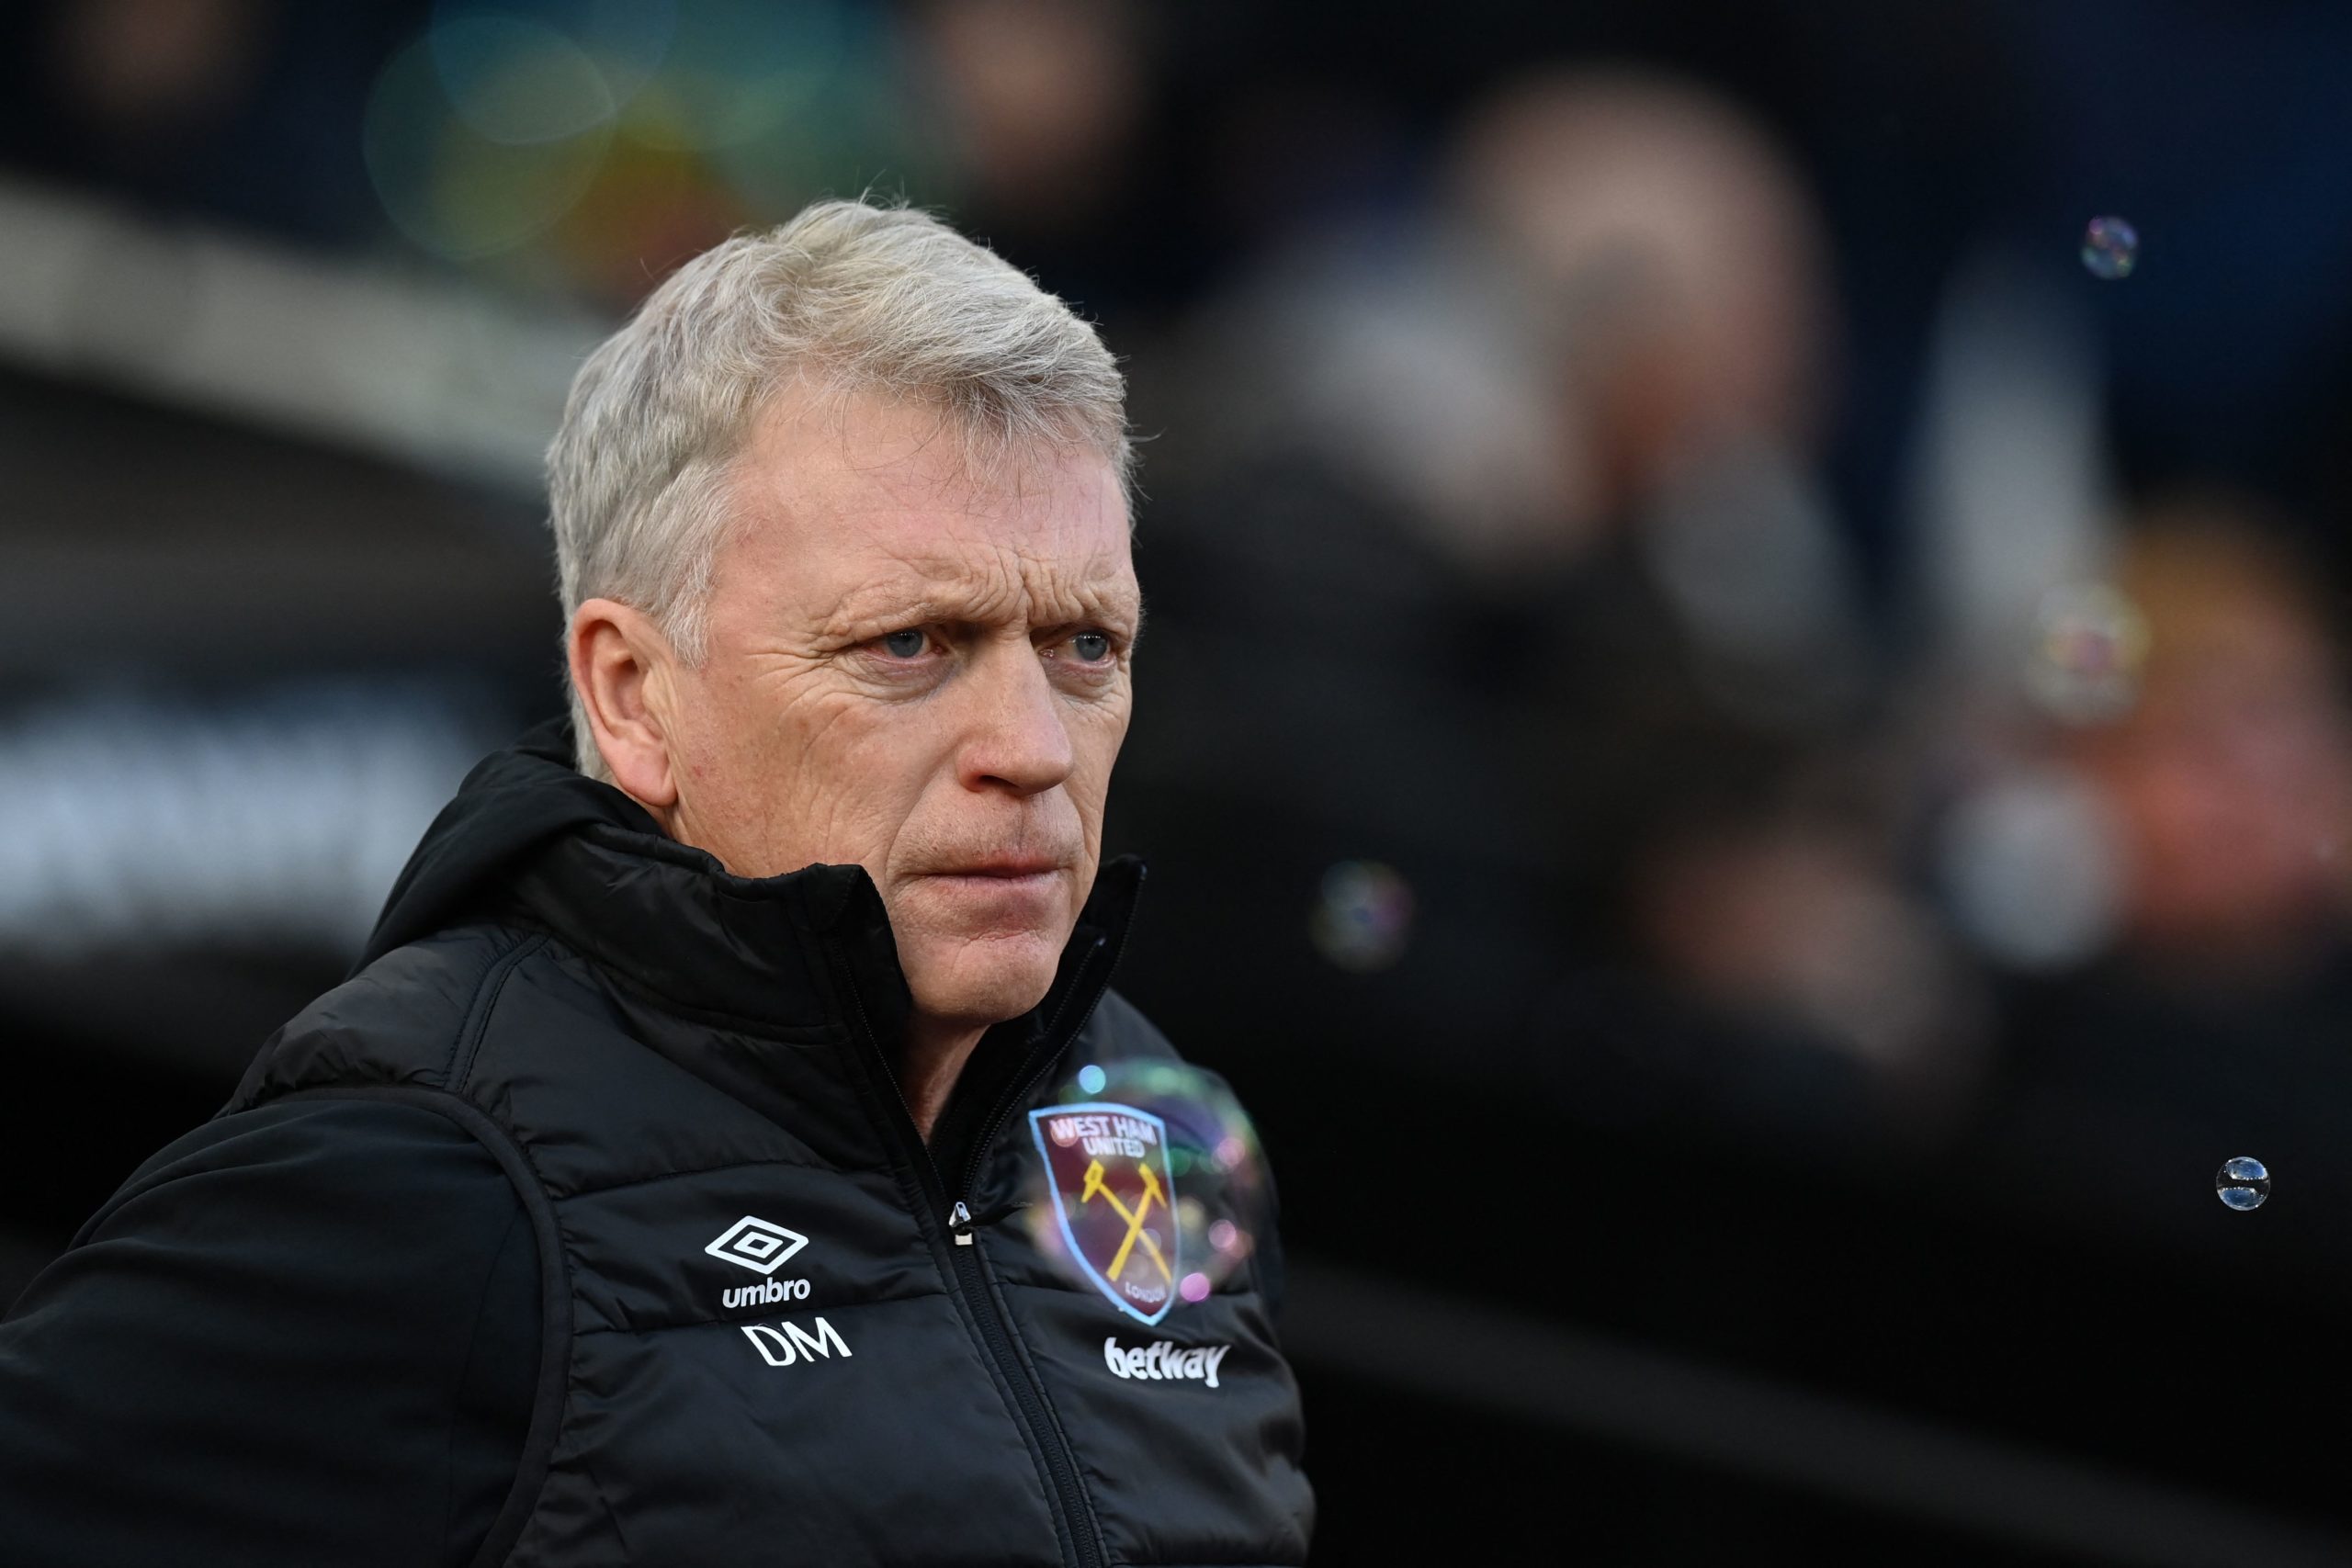 David Moyes says he’s asked club about one player he wants to sign for West Ham in the January transfer window